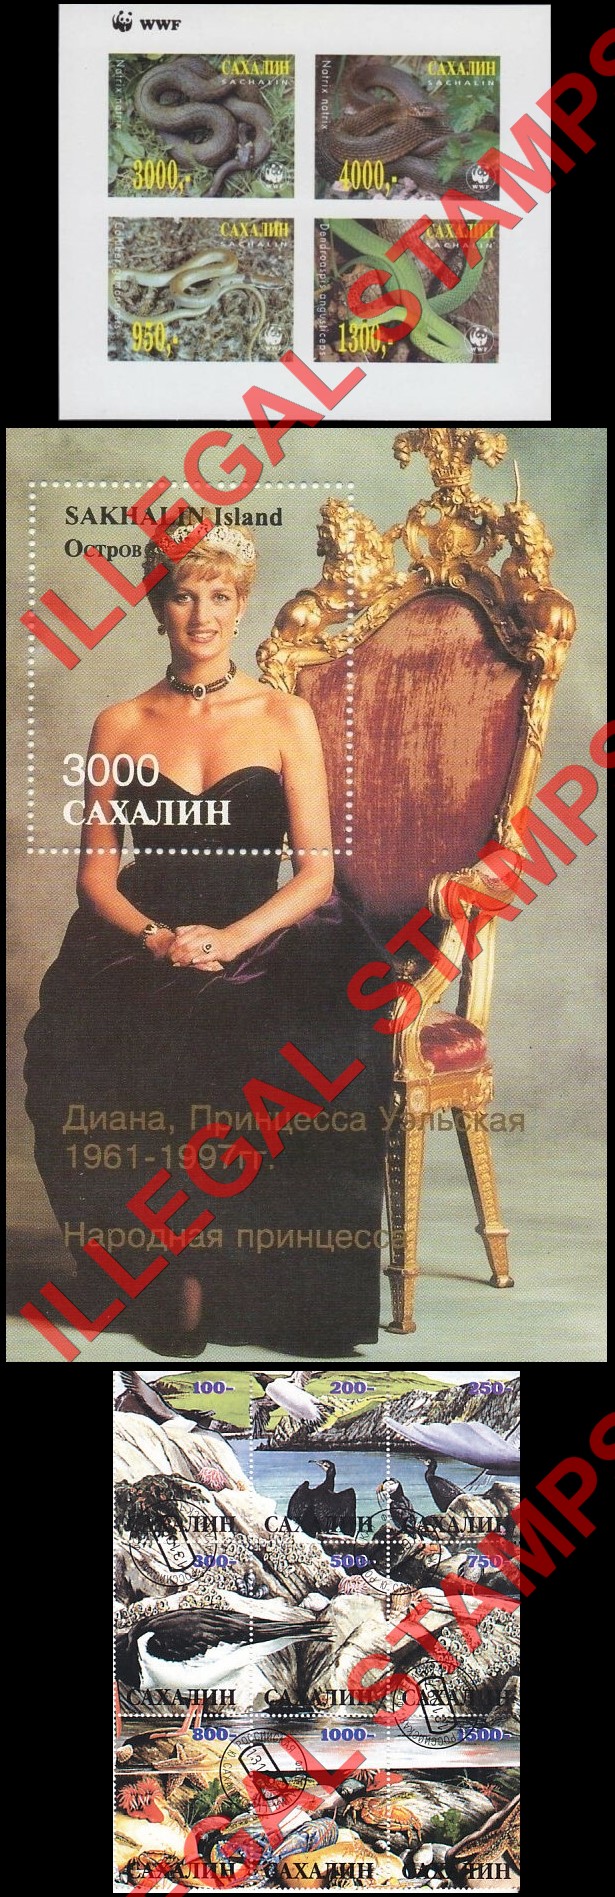 Sakhalin 1997 More Counterfeit Illegal Stamps